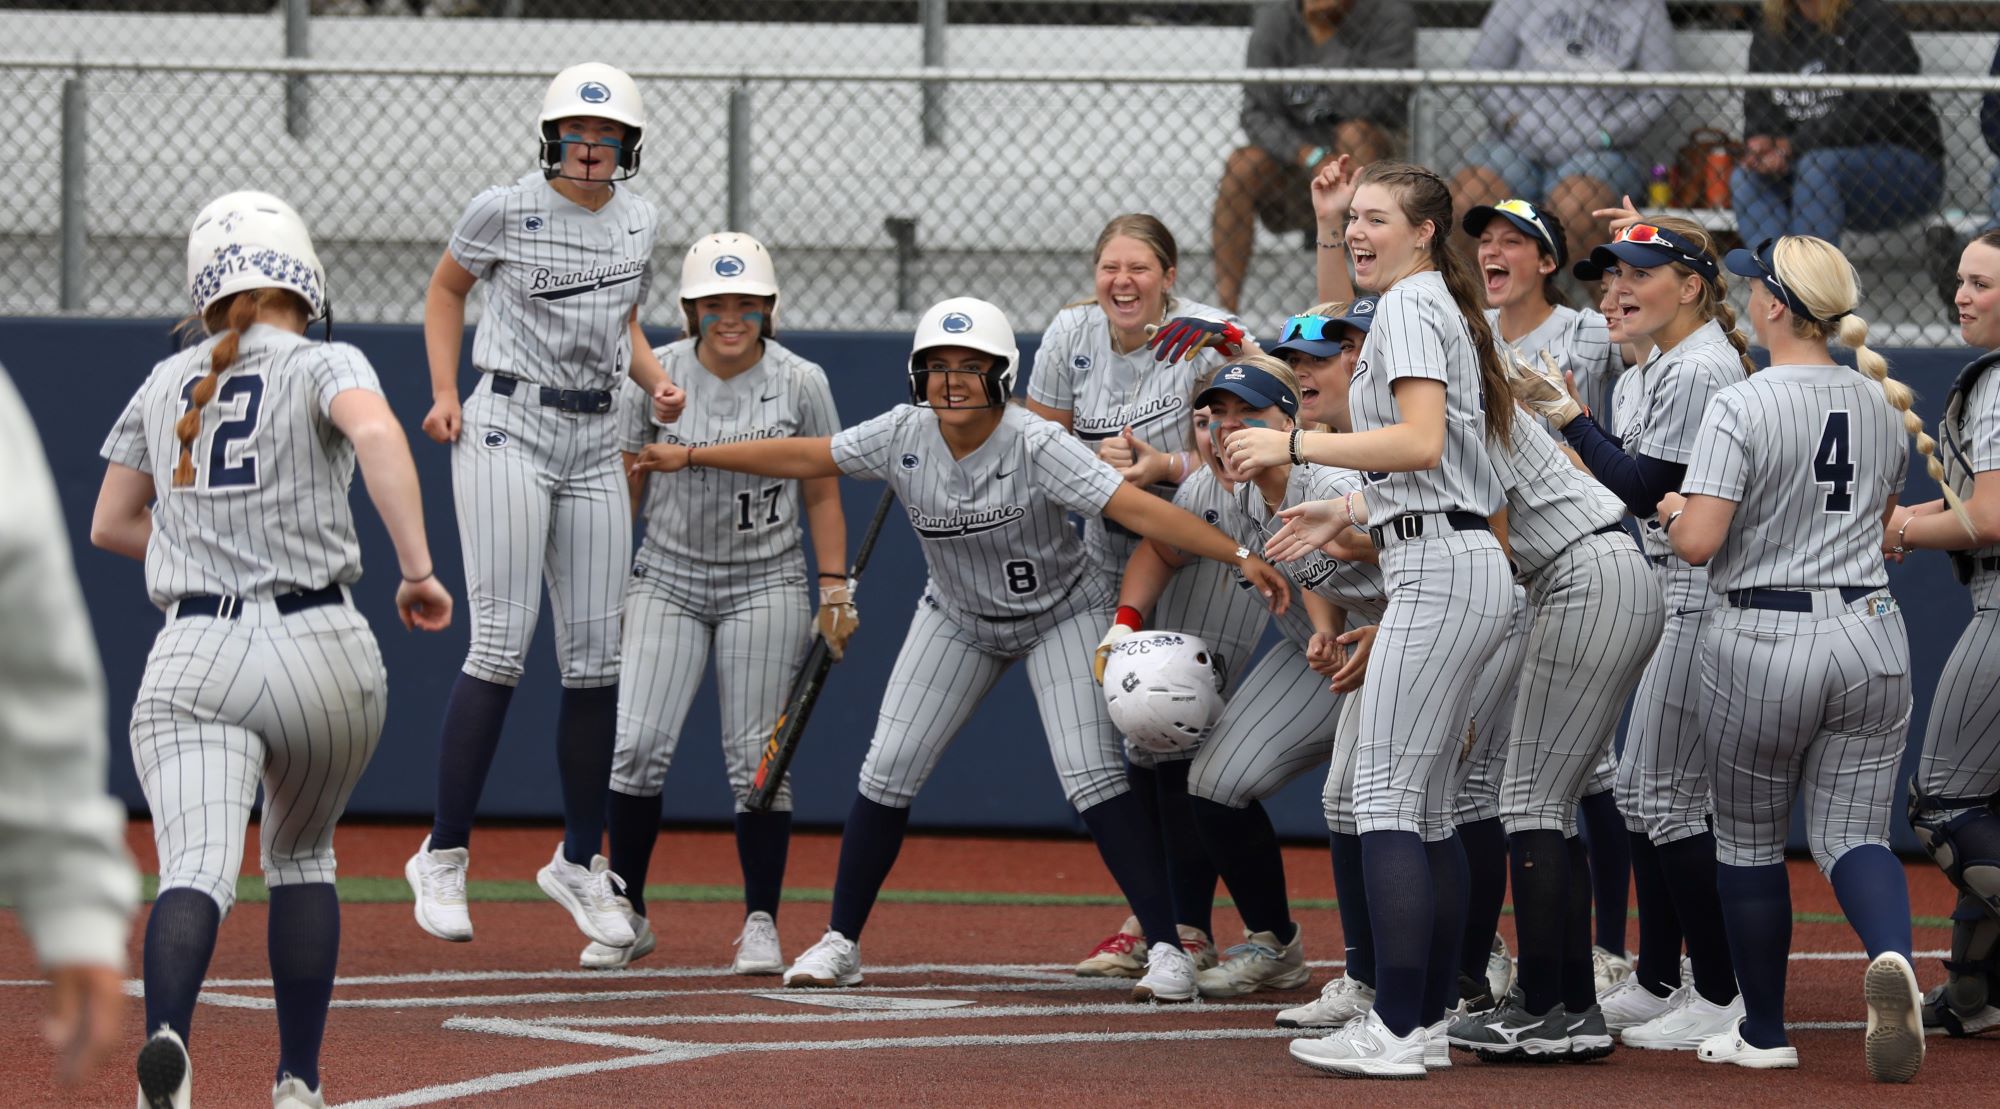 Teammates wait to celebrate Meghan Ferry's second home run of the day